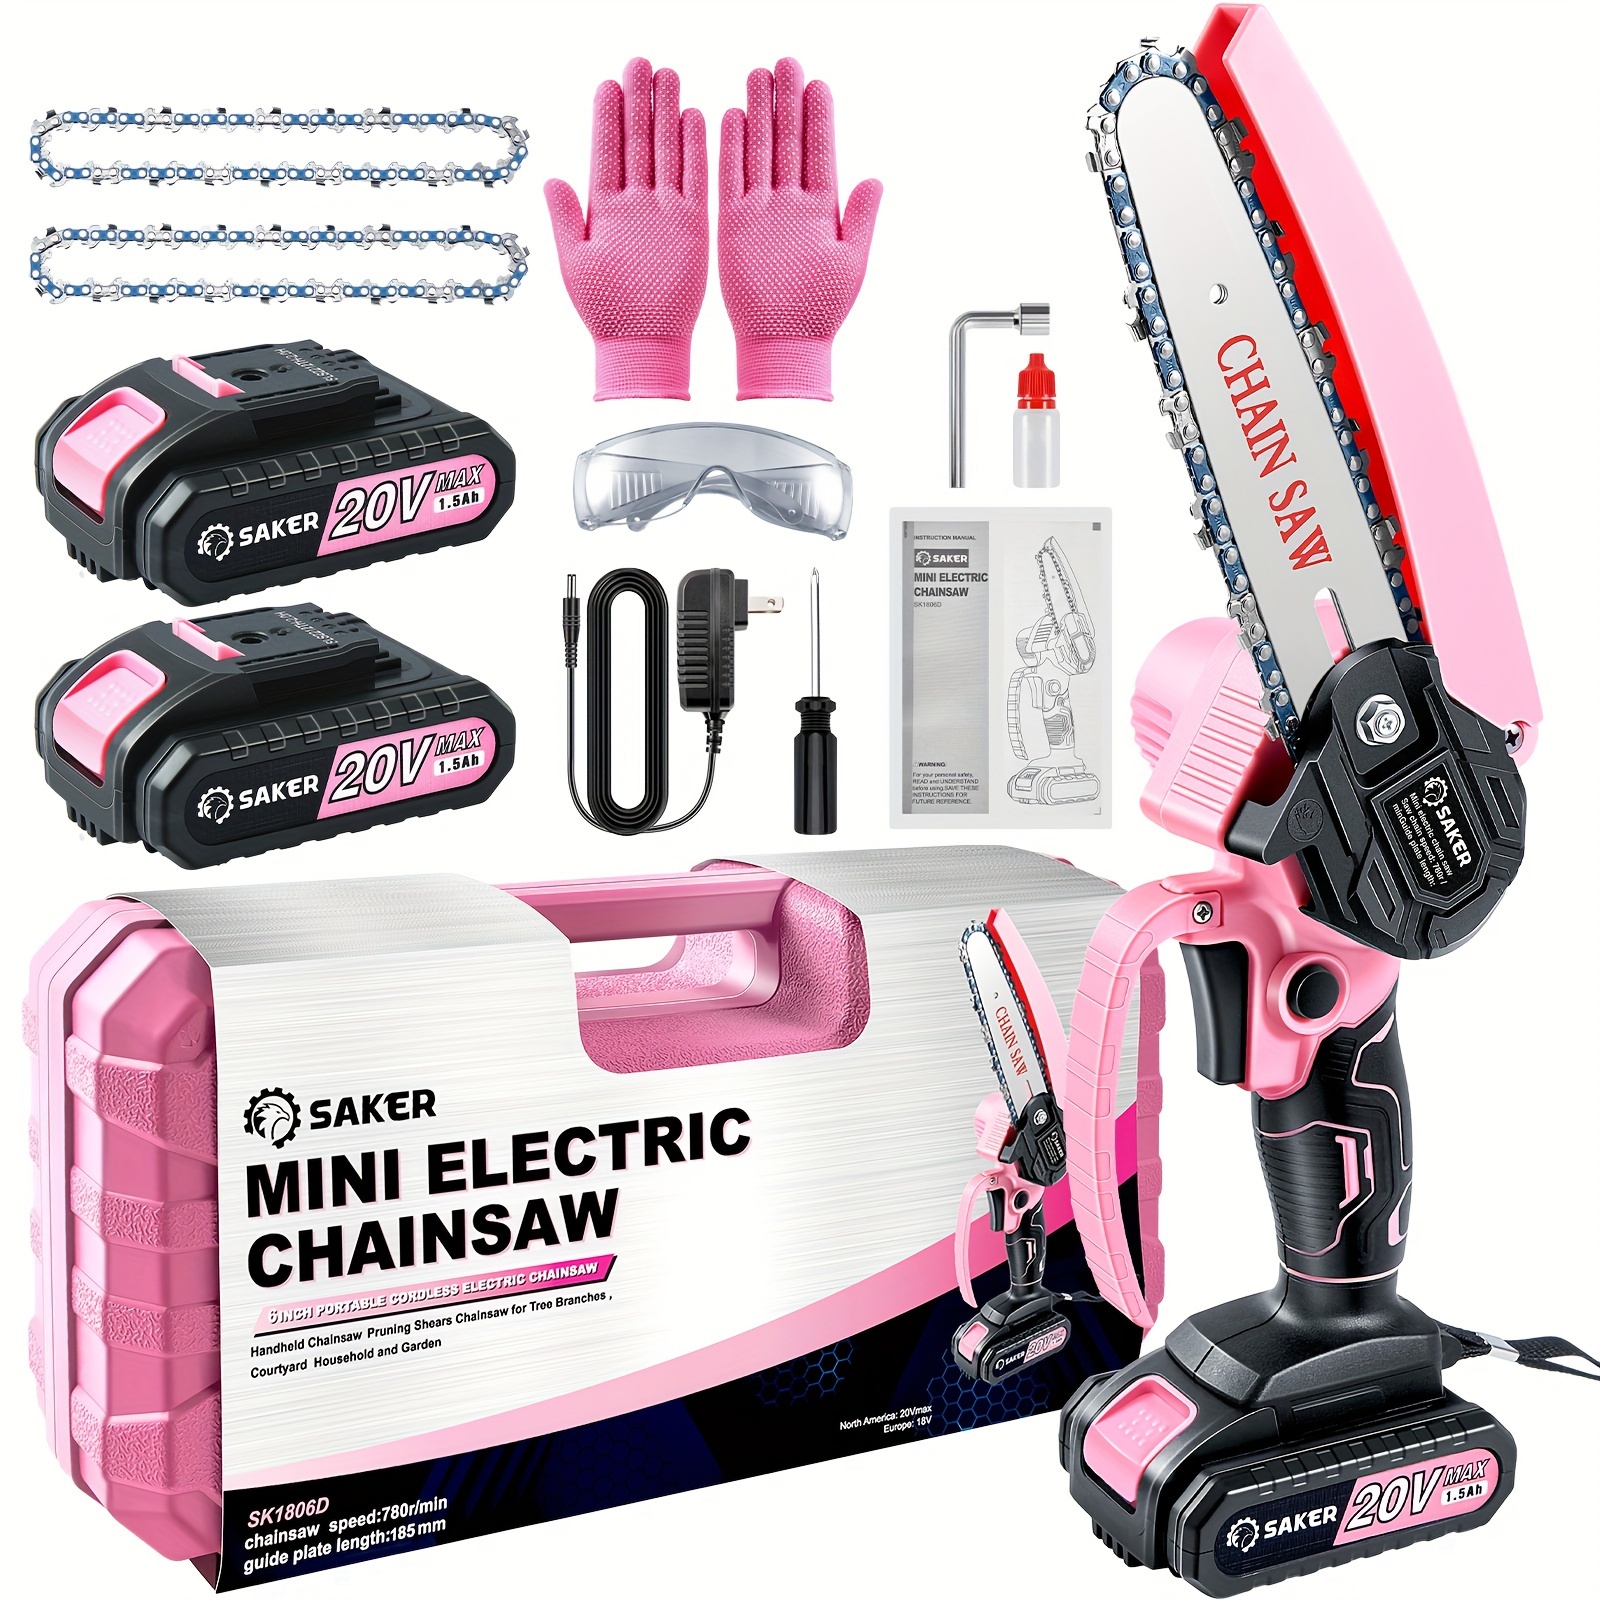 

Mini Electric Chainsaw, 6 Inch, Handheld Portable Chain Saw Pruning Shears Chainsaw Cordless For Tree Branches, Household And Garden ( Mini Chainsaw Pink + 2 Batteries + 3 Chains)